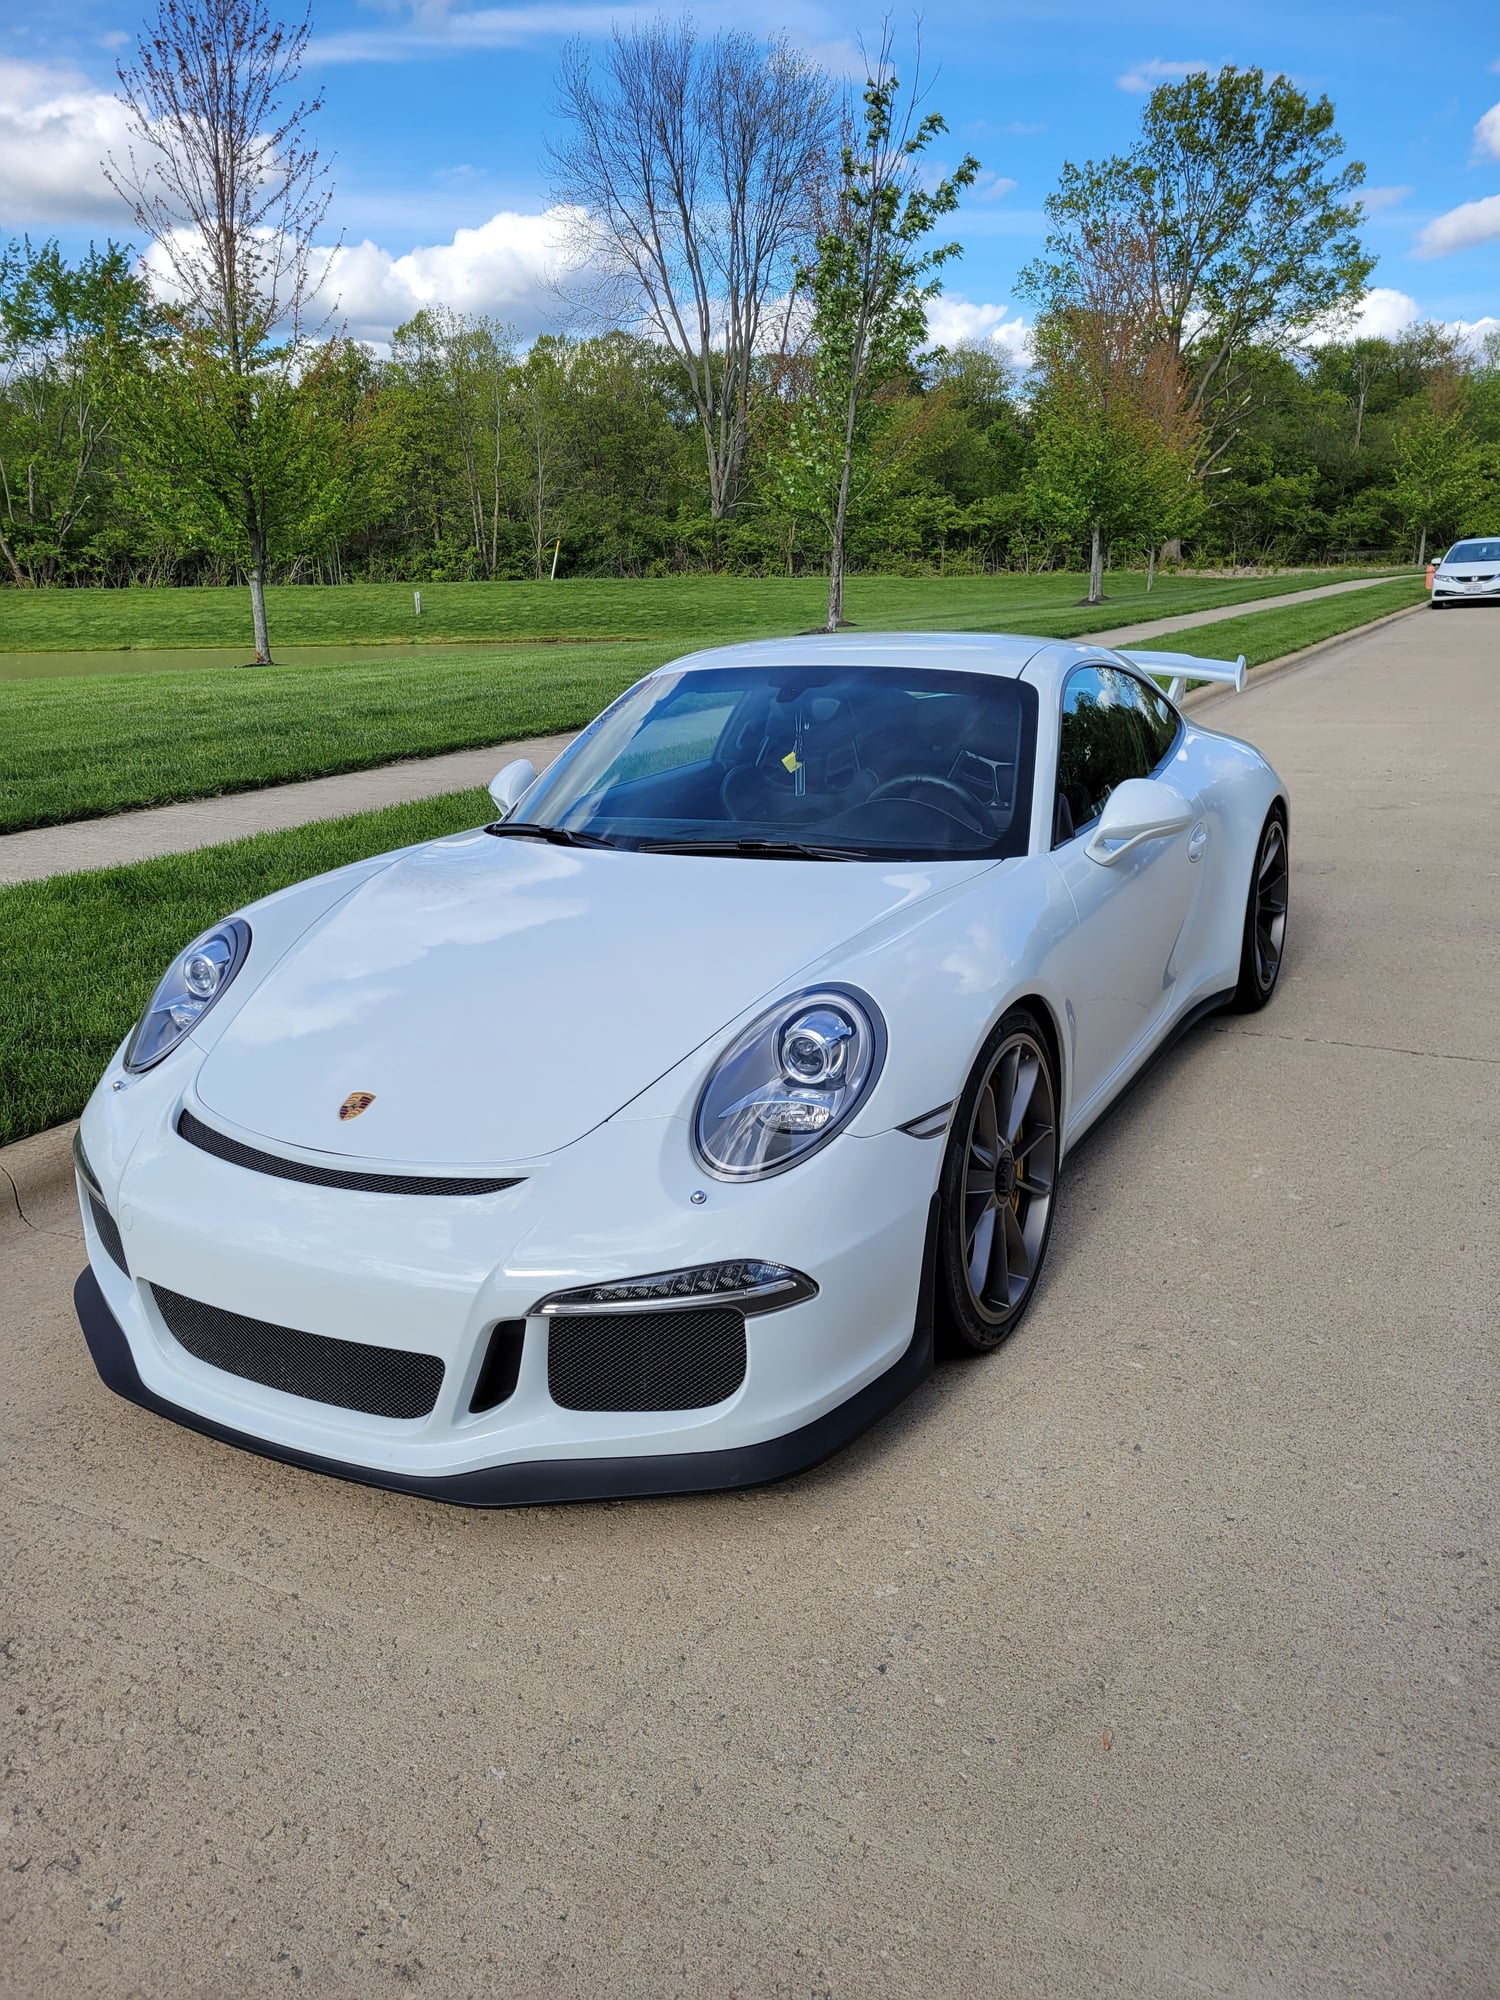 2015 Porsche GT3 - 2015 911 GT3 LWB, FAL, Leather Interior - Used - VIN WP0AC2A95FS184126 - 31,750 Miles - 6 cyl - 2WD - Automatic - Coupe - White - Columbus, OH 43017, United States